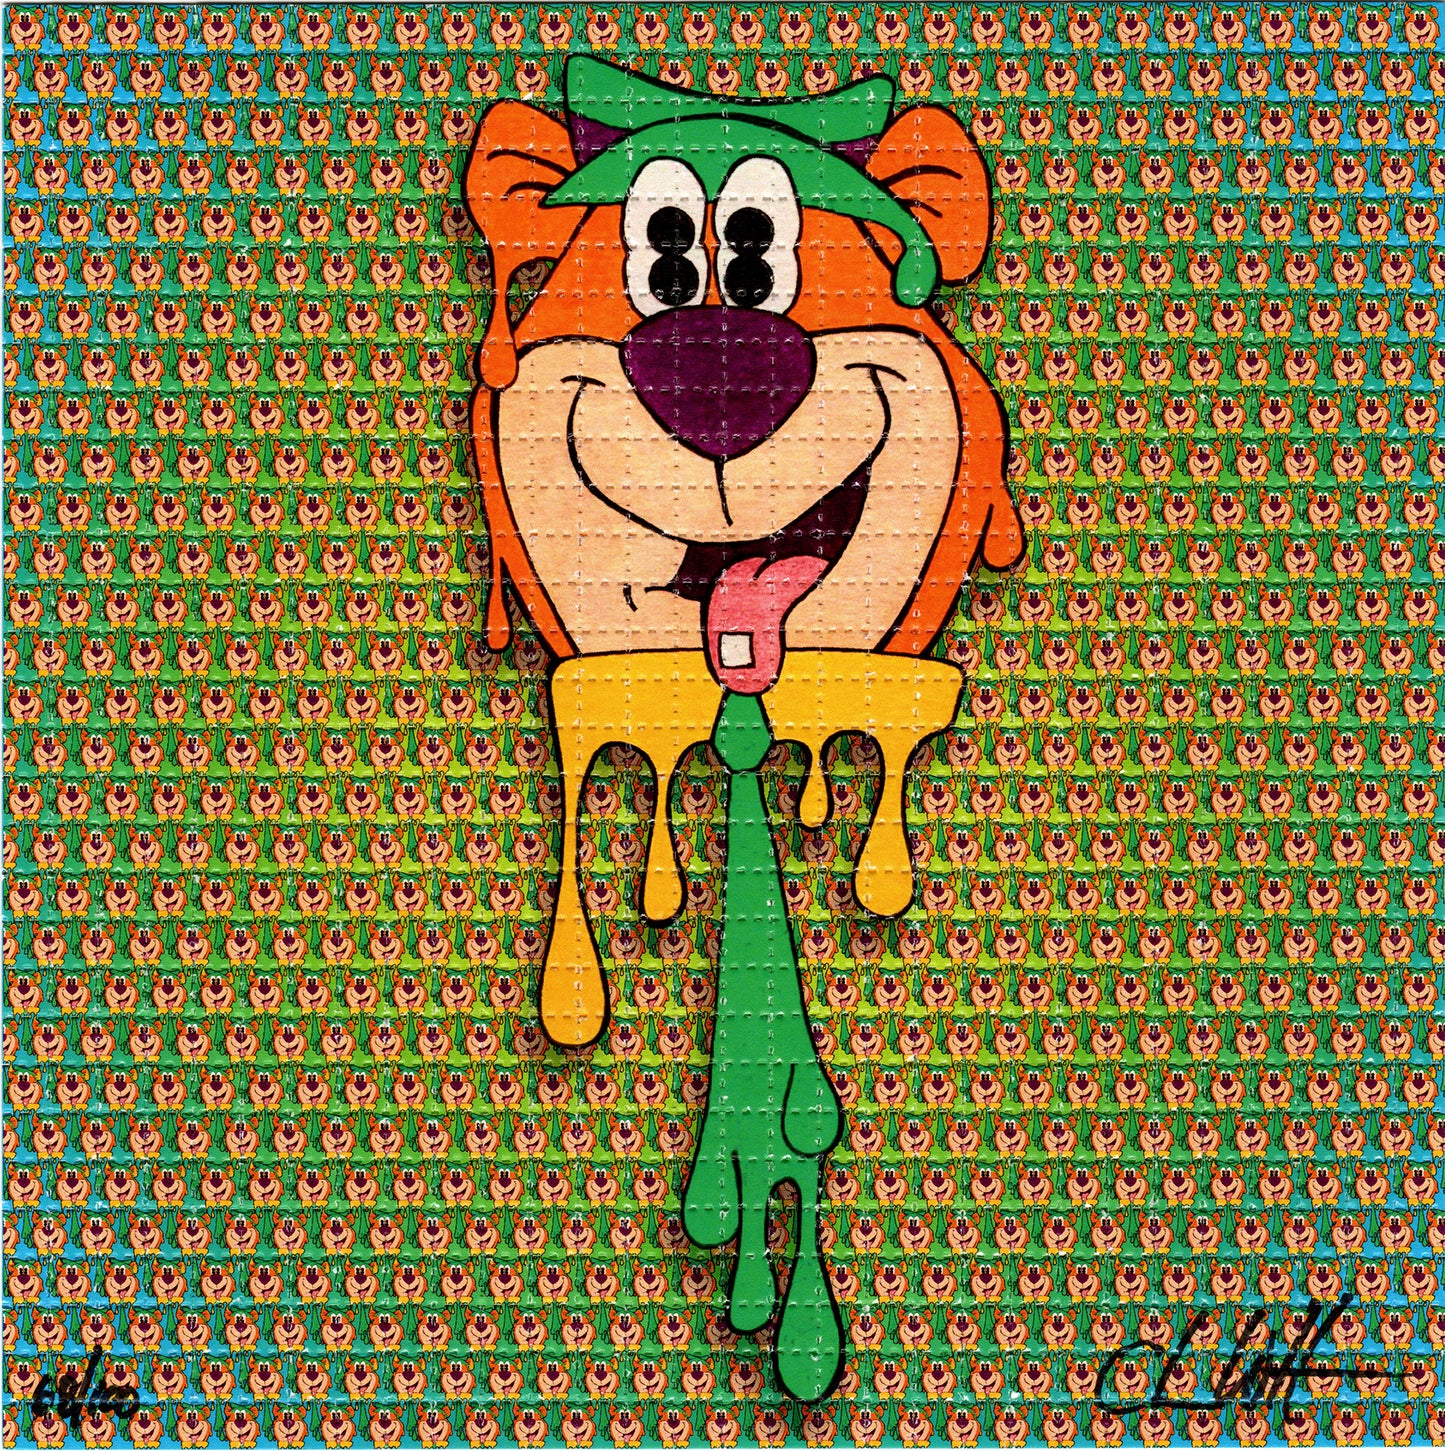 Not Your Average Bear by Christopher Williams Signed Limited Edition LSD blotter art print